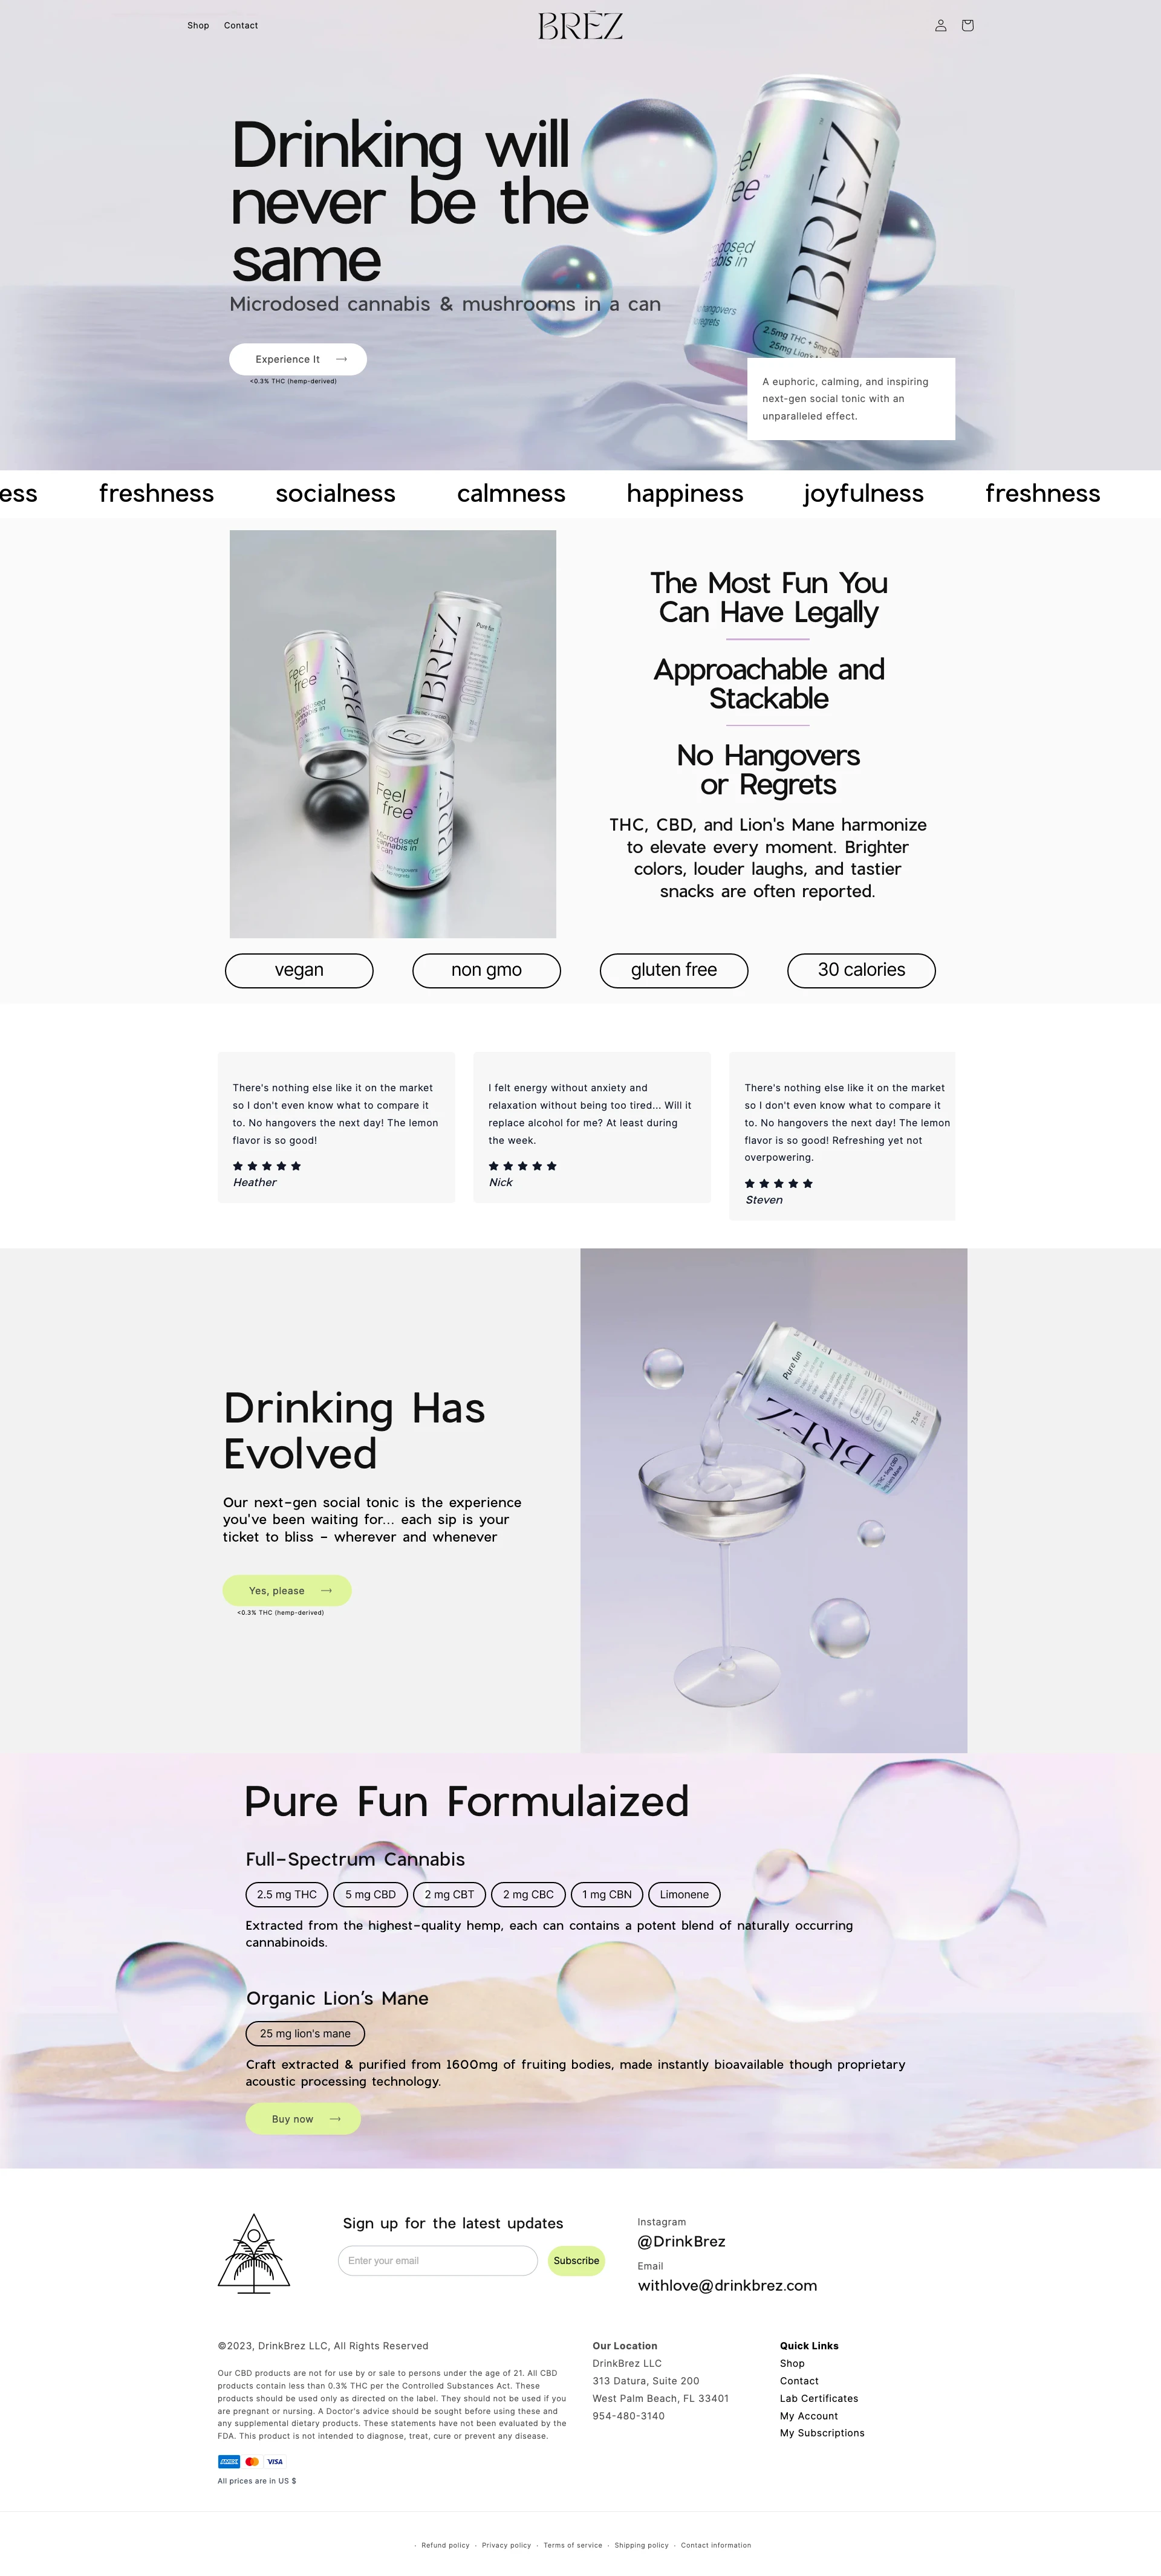 BRĒZ Landing Page Example: Drinking will never be the same. Microdosed cannabis & mushrooms in a can.